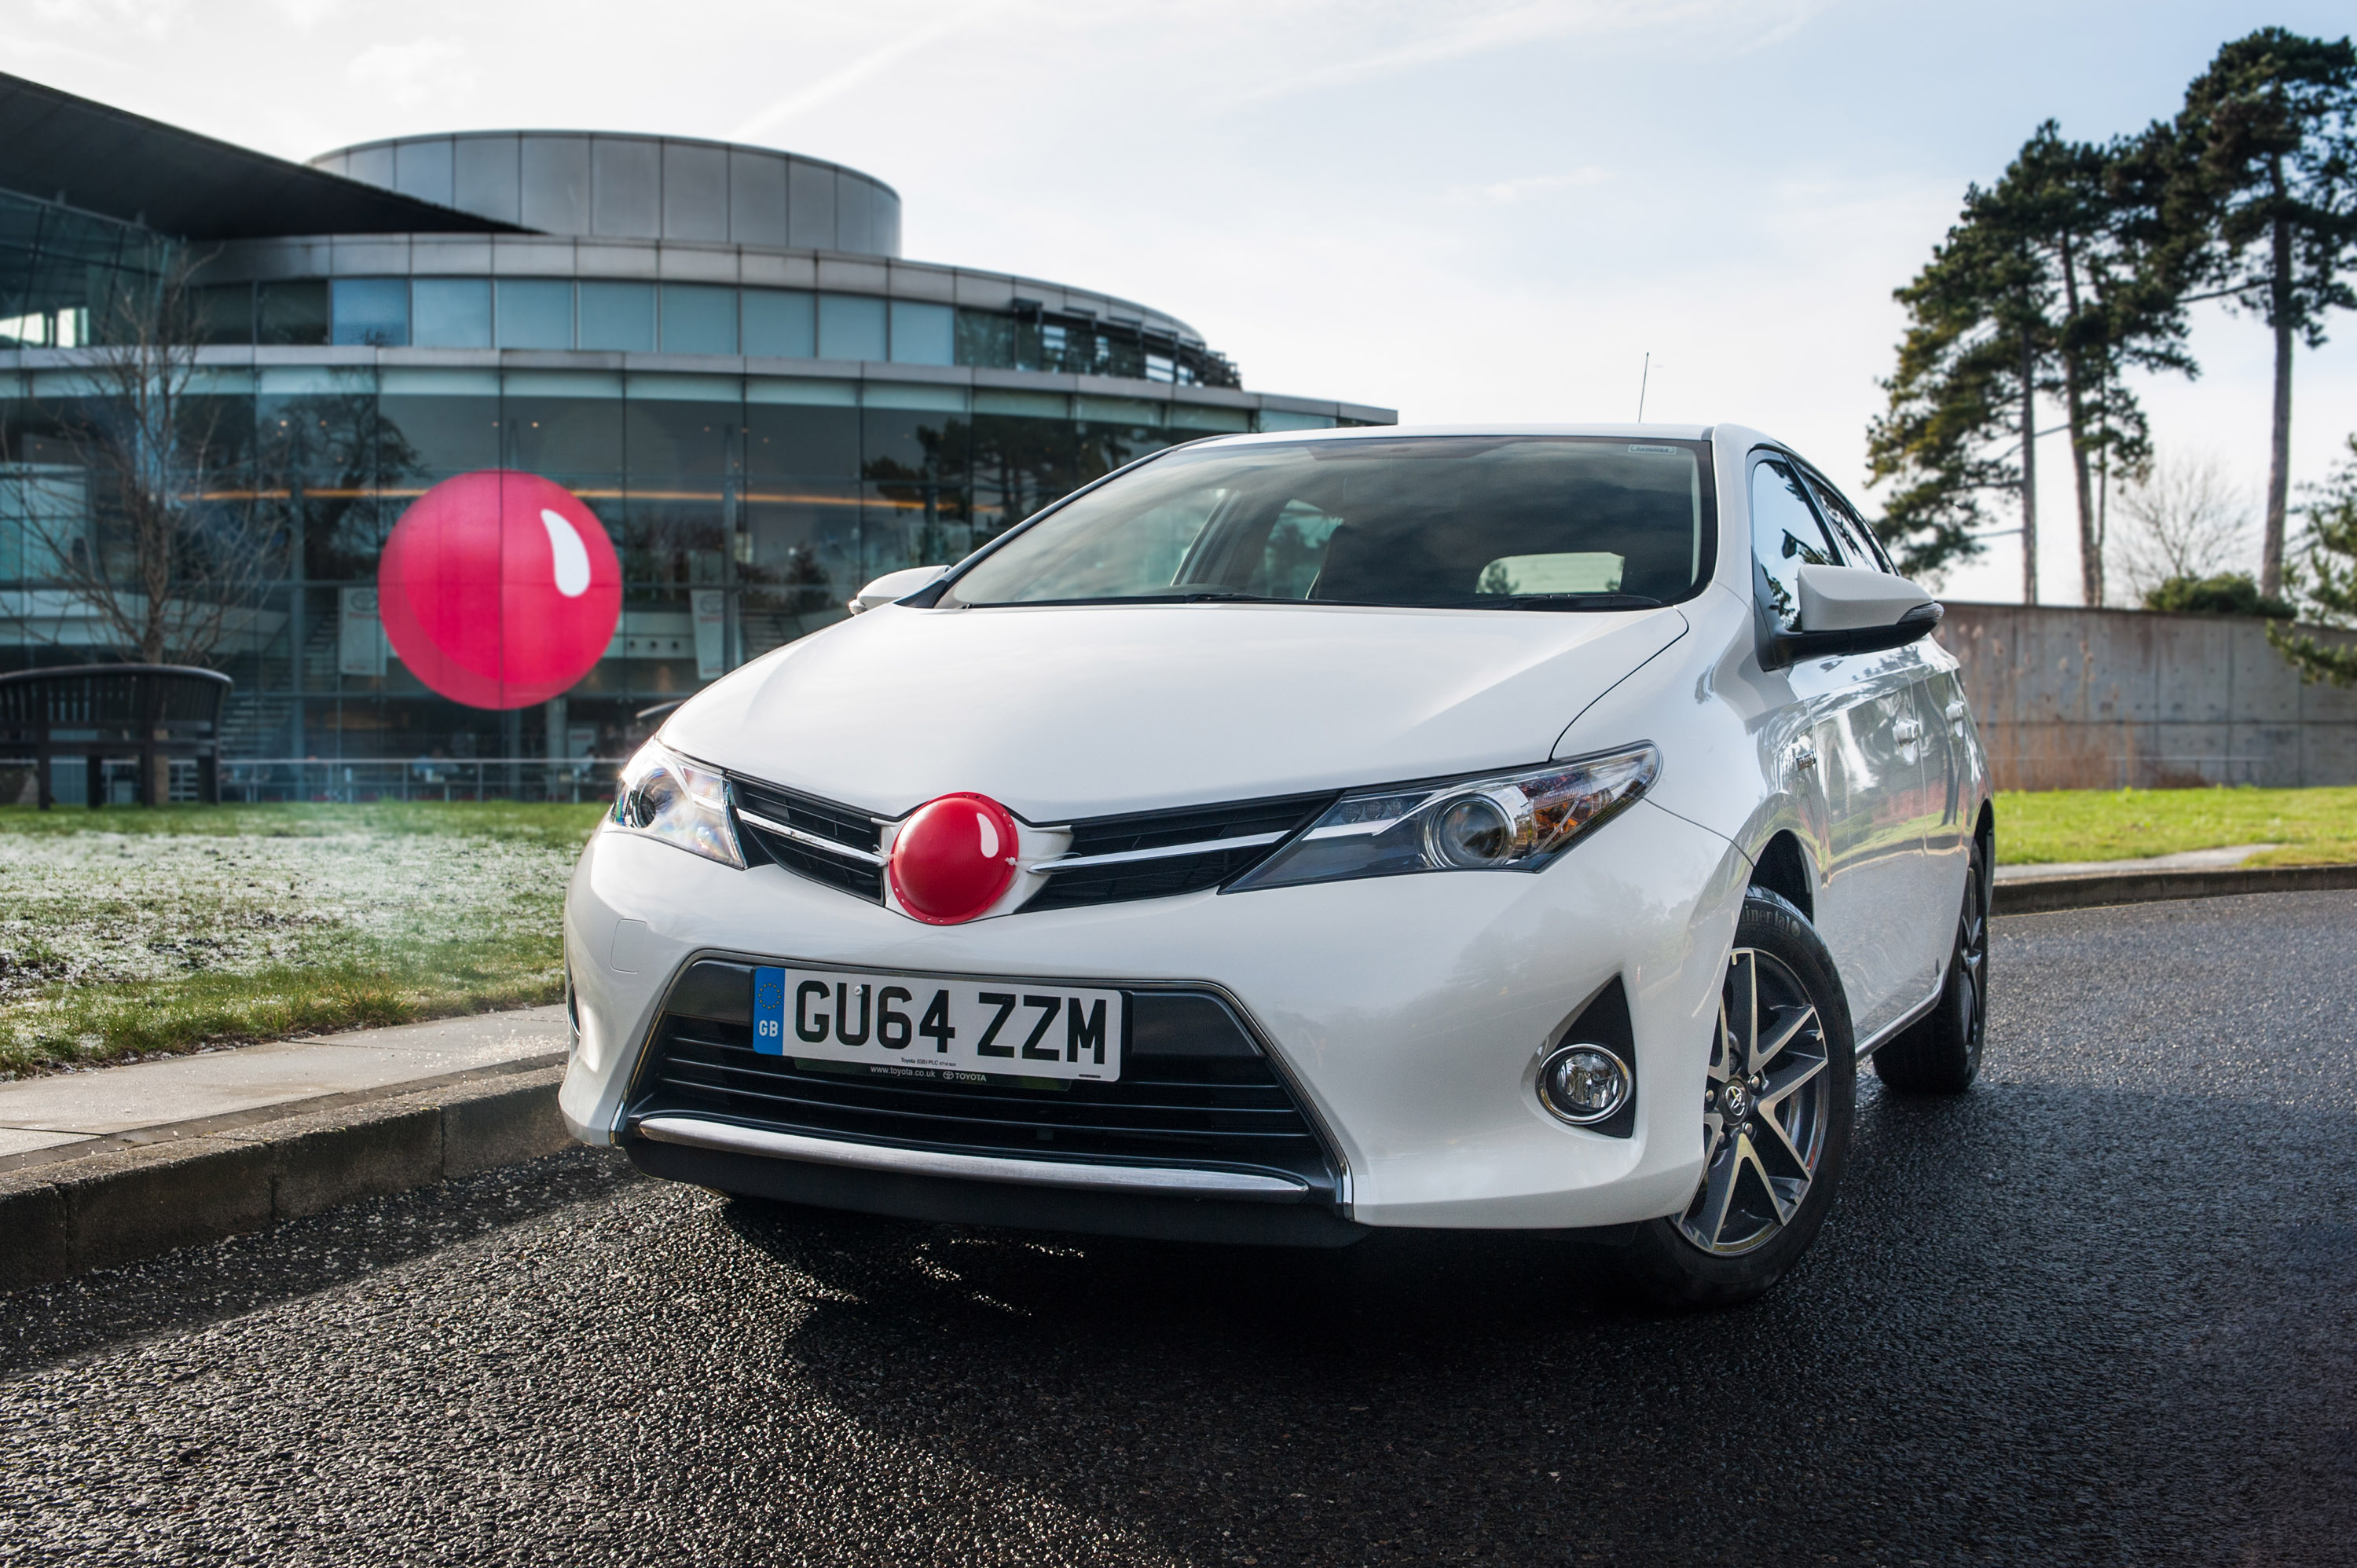 Toyota Red Nose Day